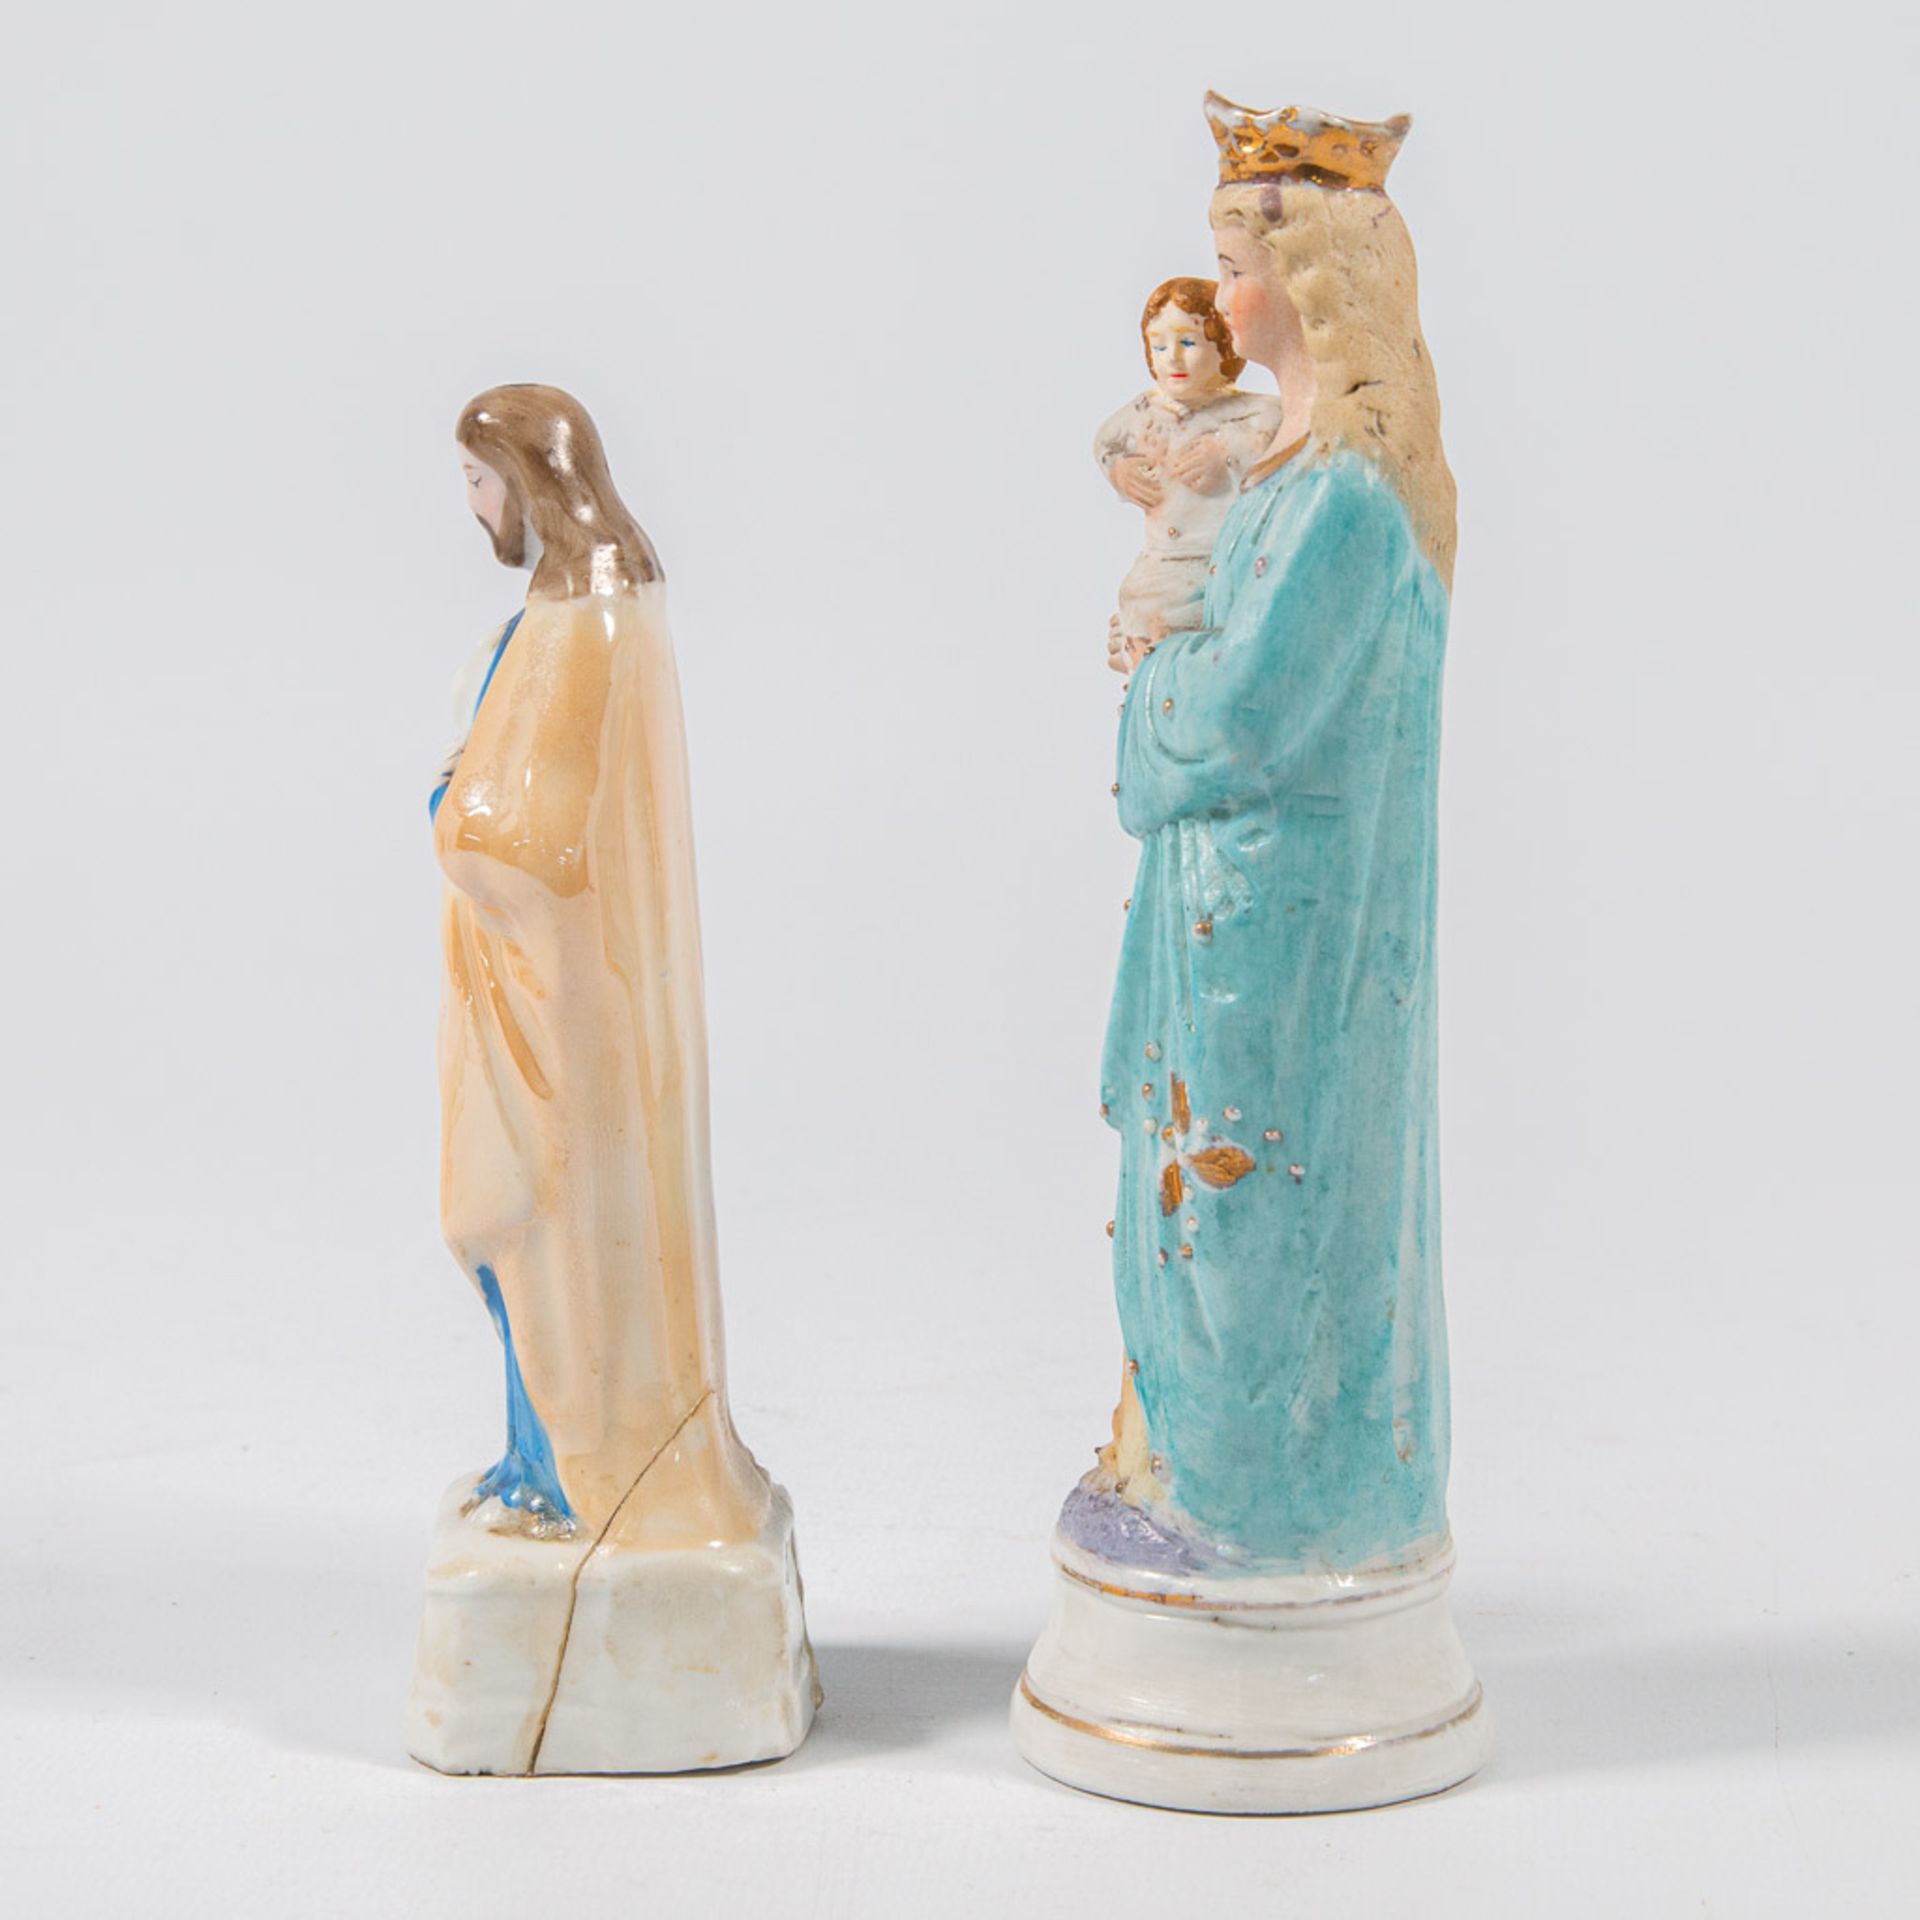 A collection of 11 bisque porcelain holy statues, Mary, Joseph, and Madonna. - Image 13 of 49